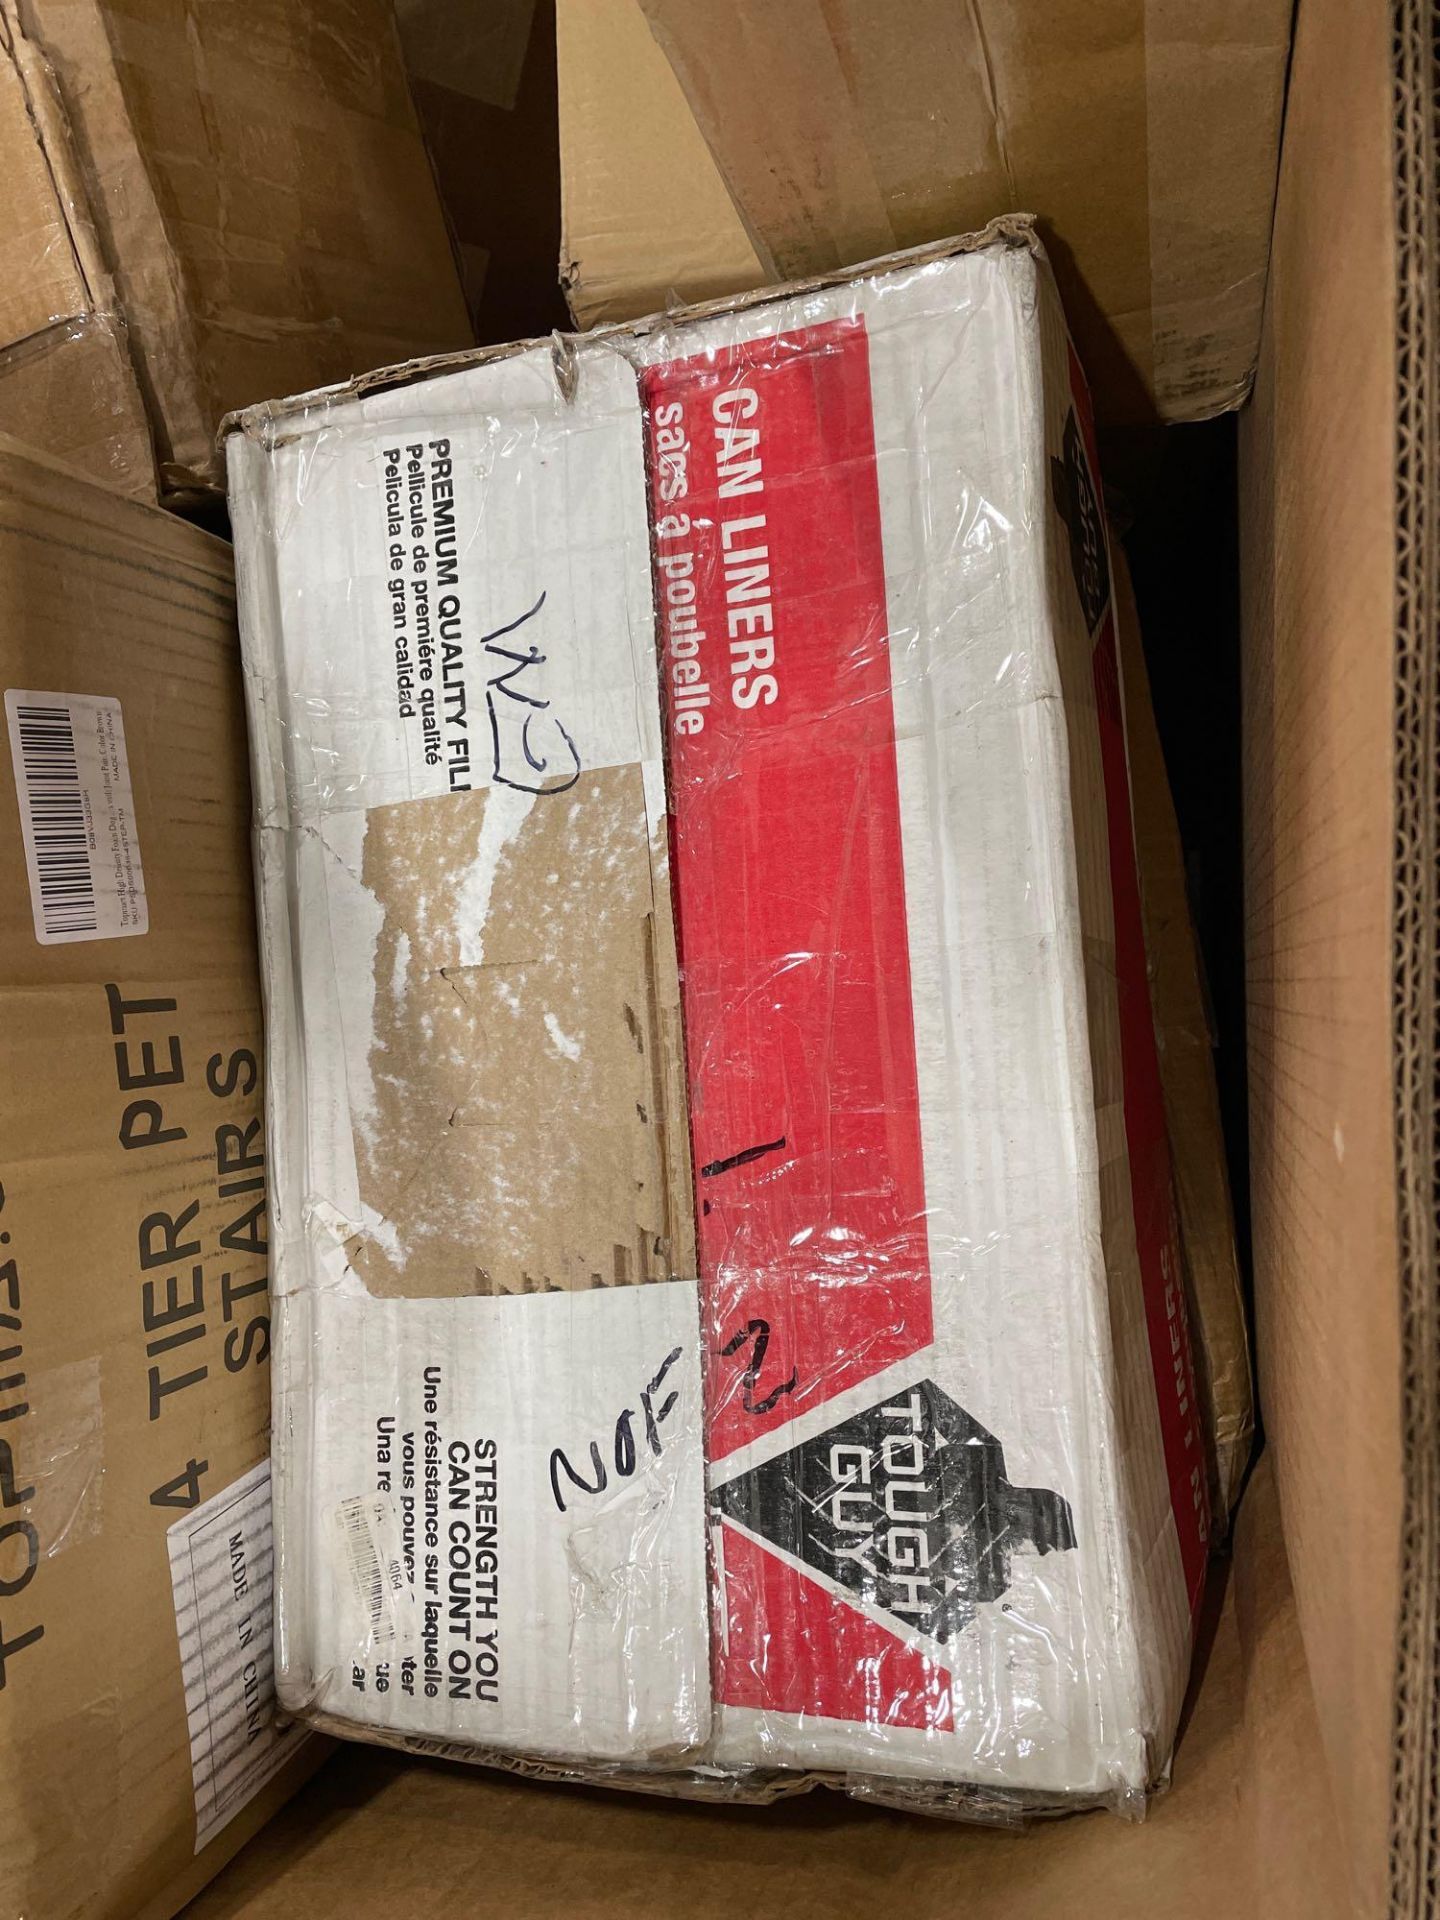 Two Pallets - Image 11 of 12